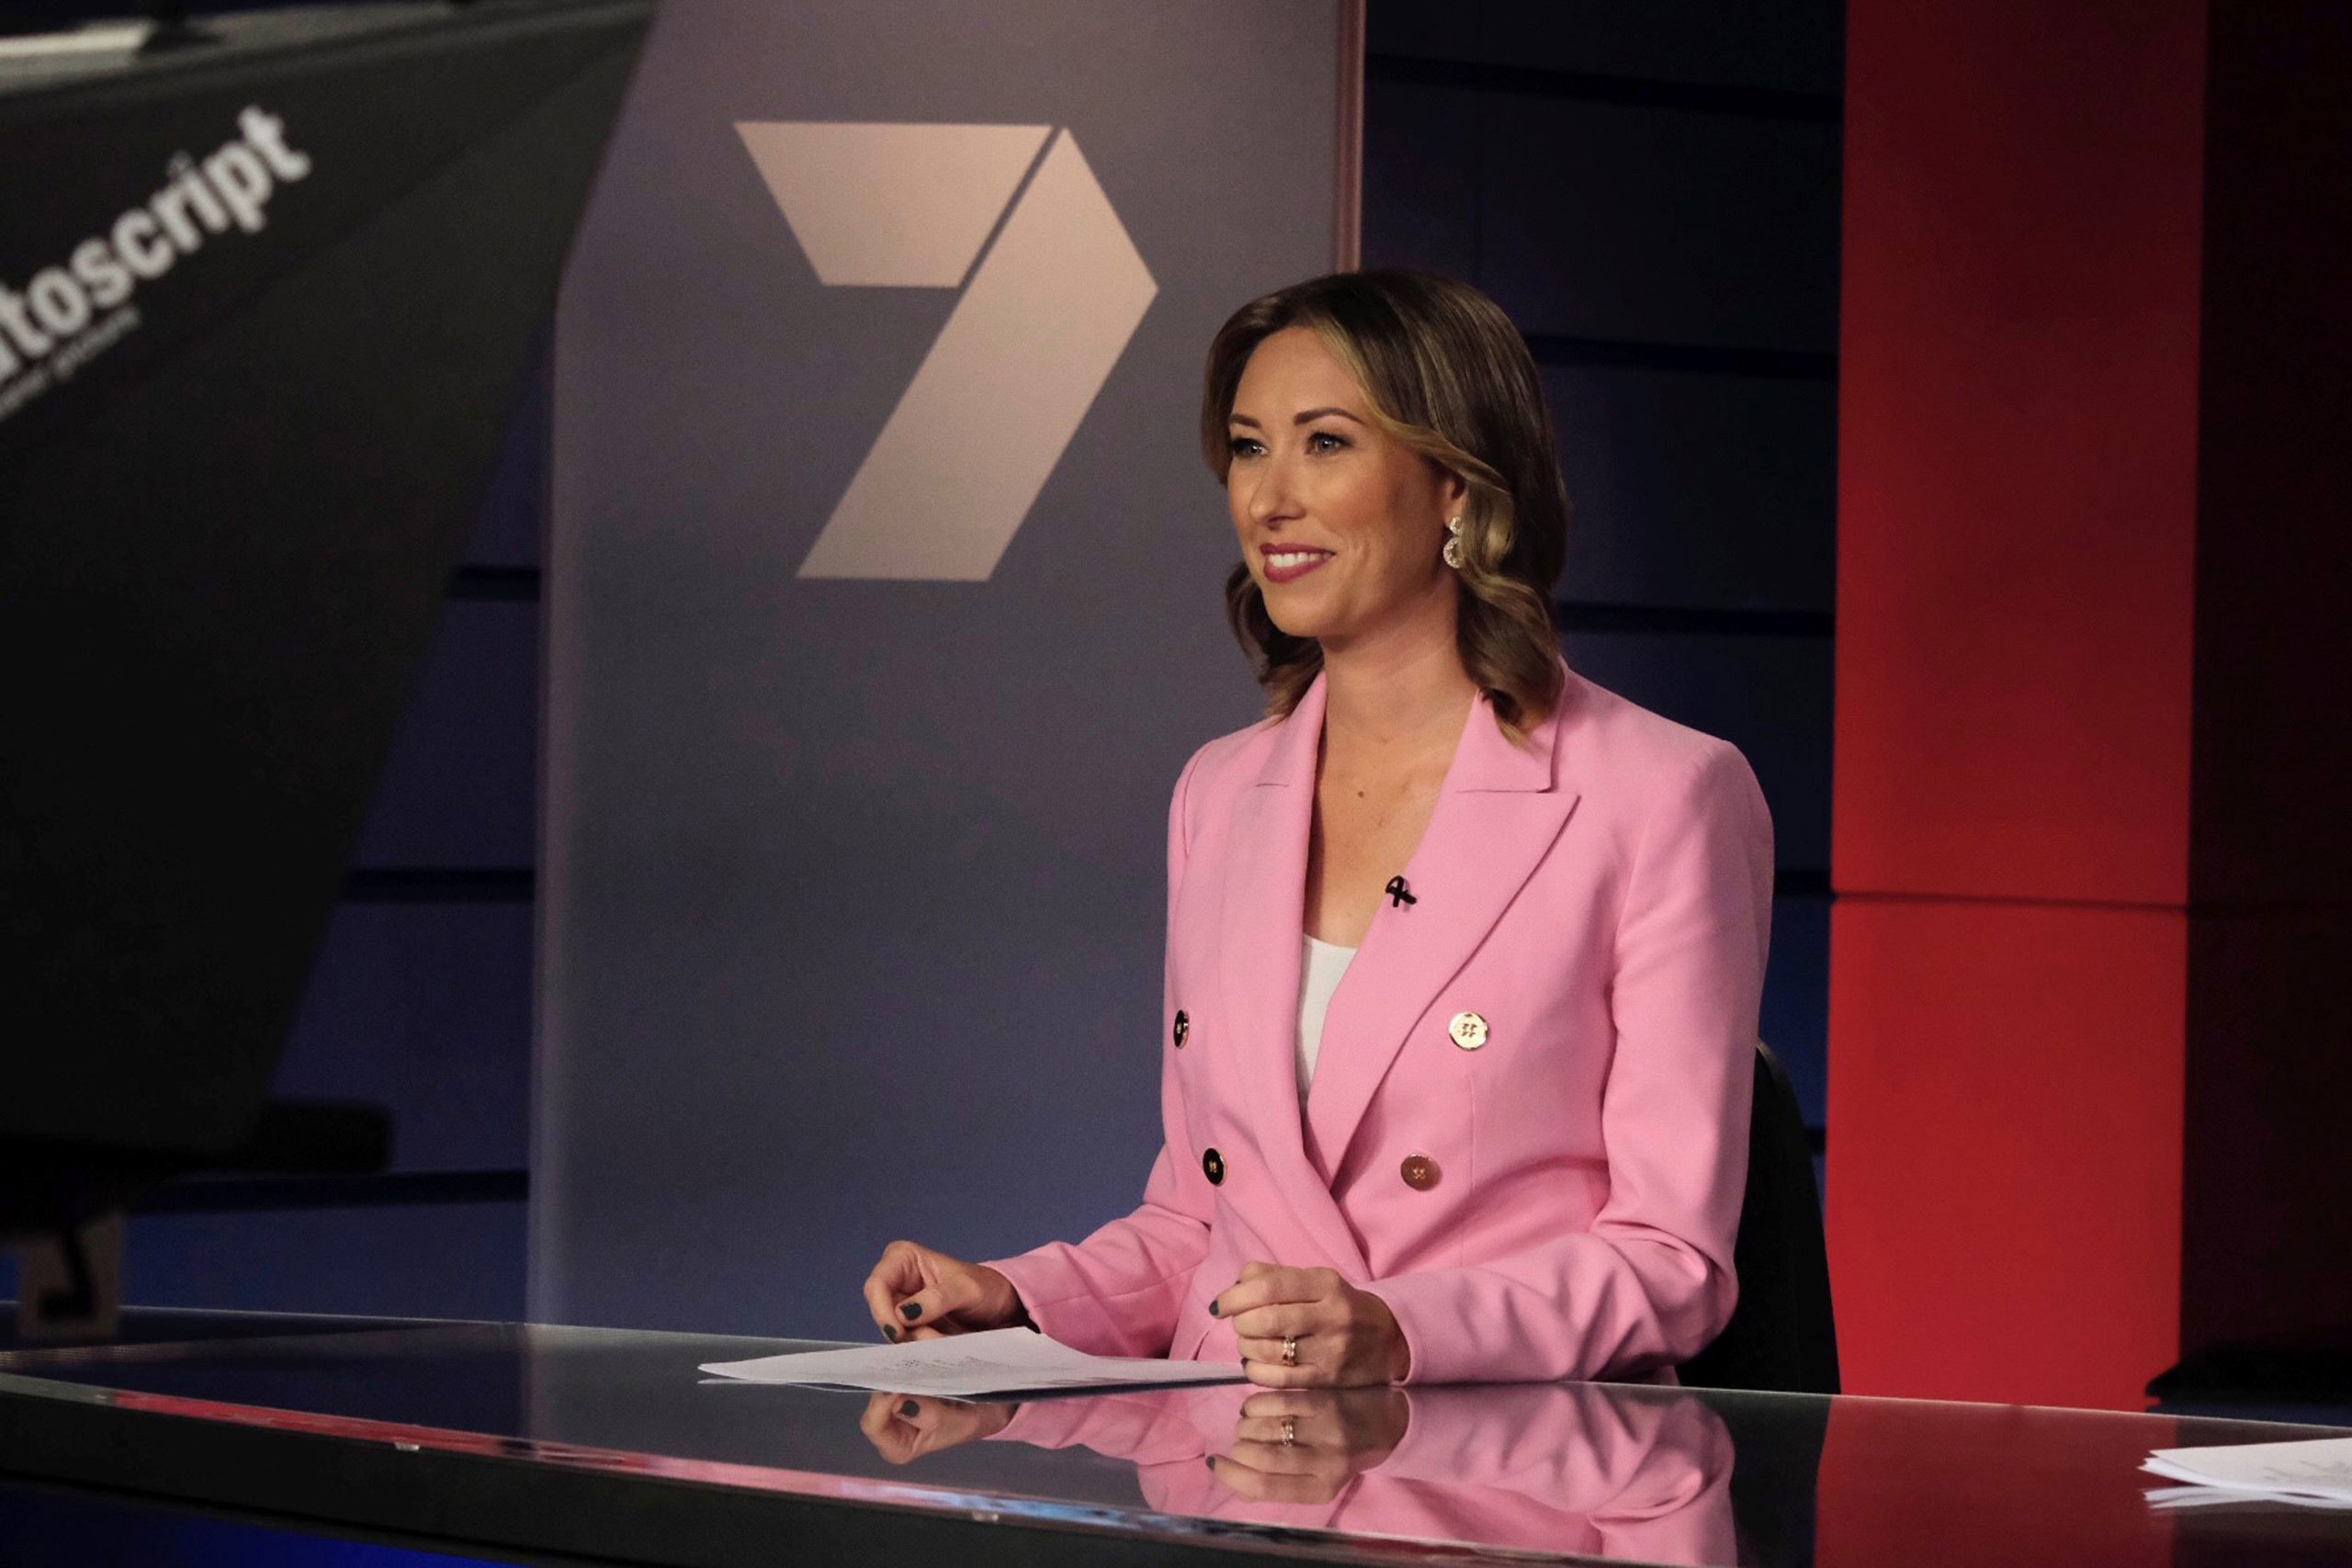 Katie Toney at the news desk for Channel 7